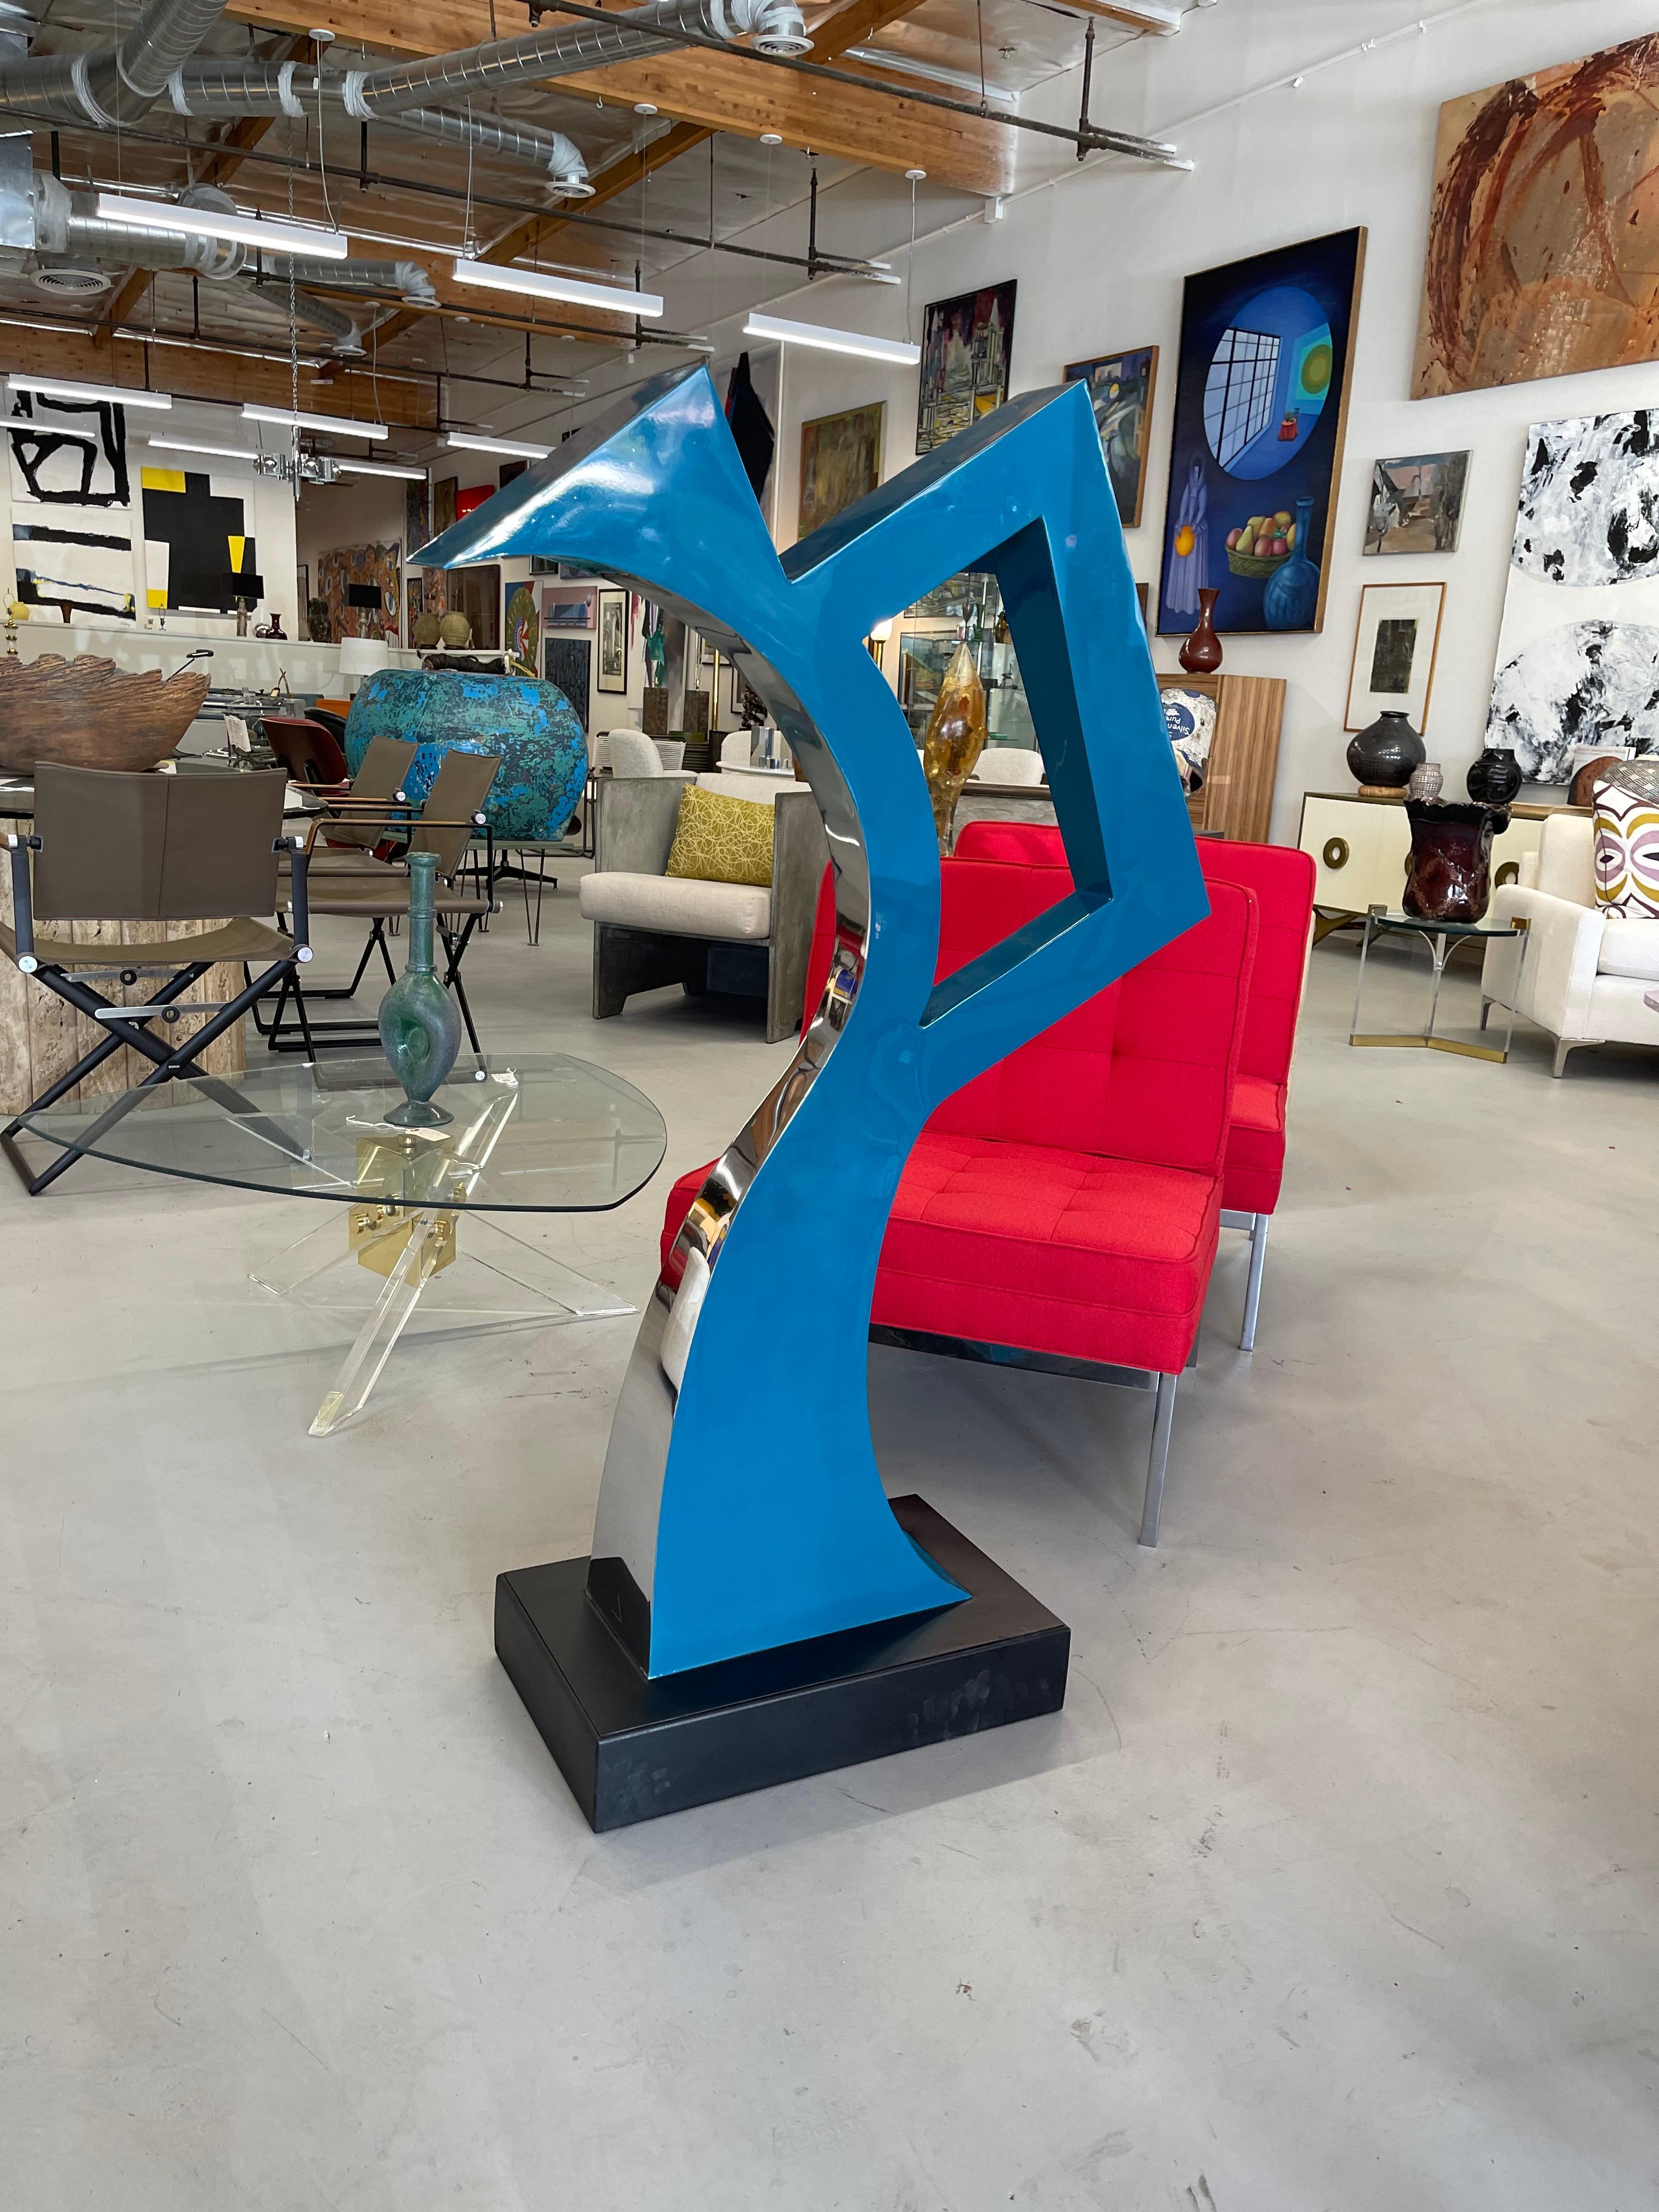 A wonderful large abstract steel sculpture by a talented pair local Palm Springs, the Sutton Brothers. It is painted and finished on one side in polished steel. Great presence. The platform base is painted a flat black. The base is intentionally